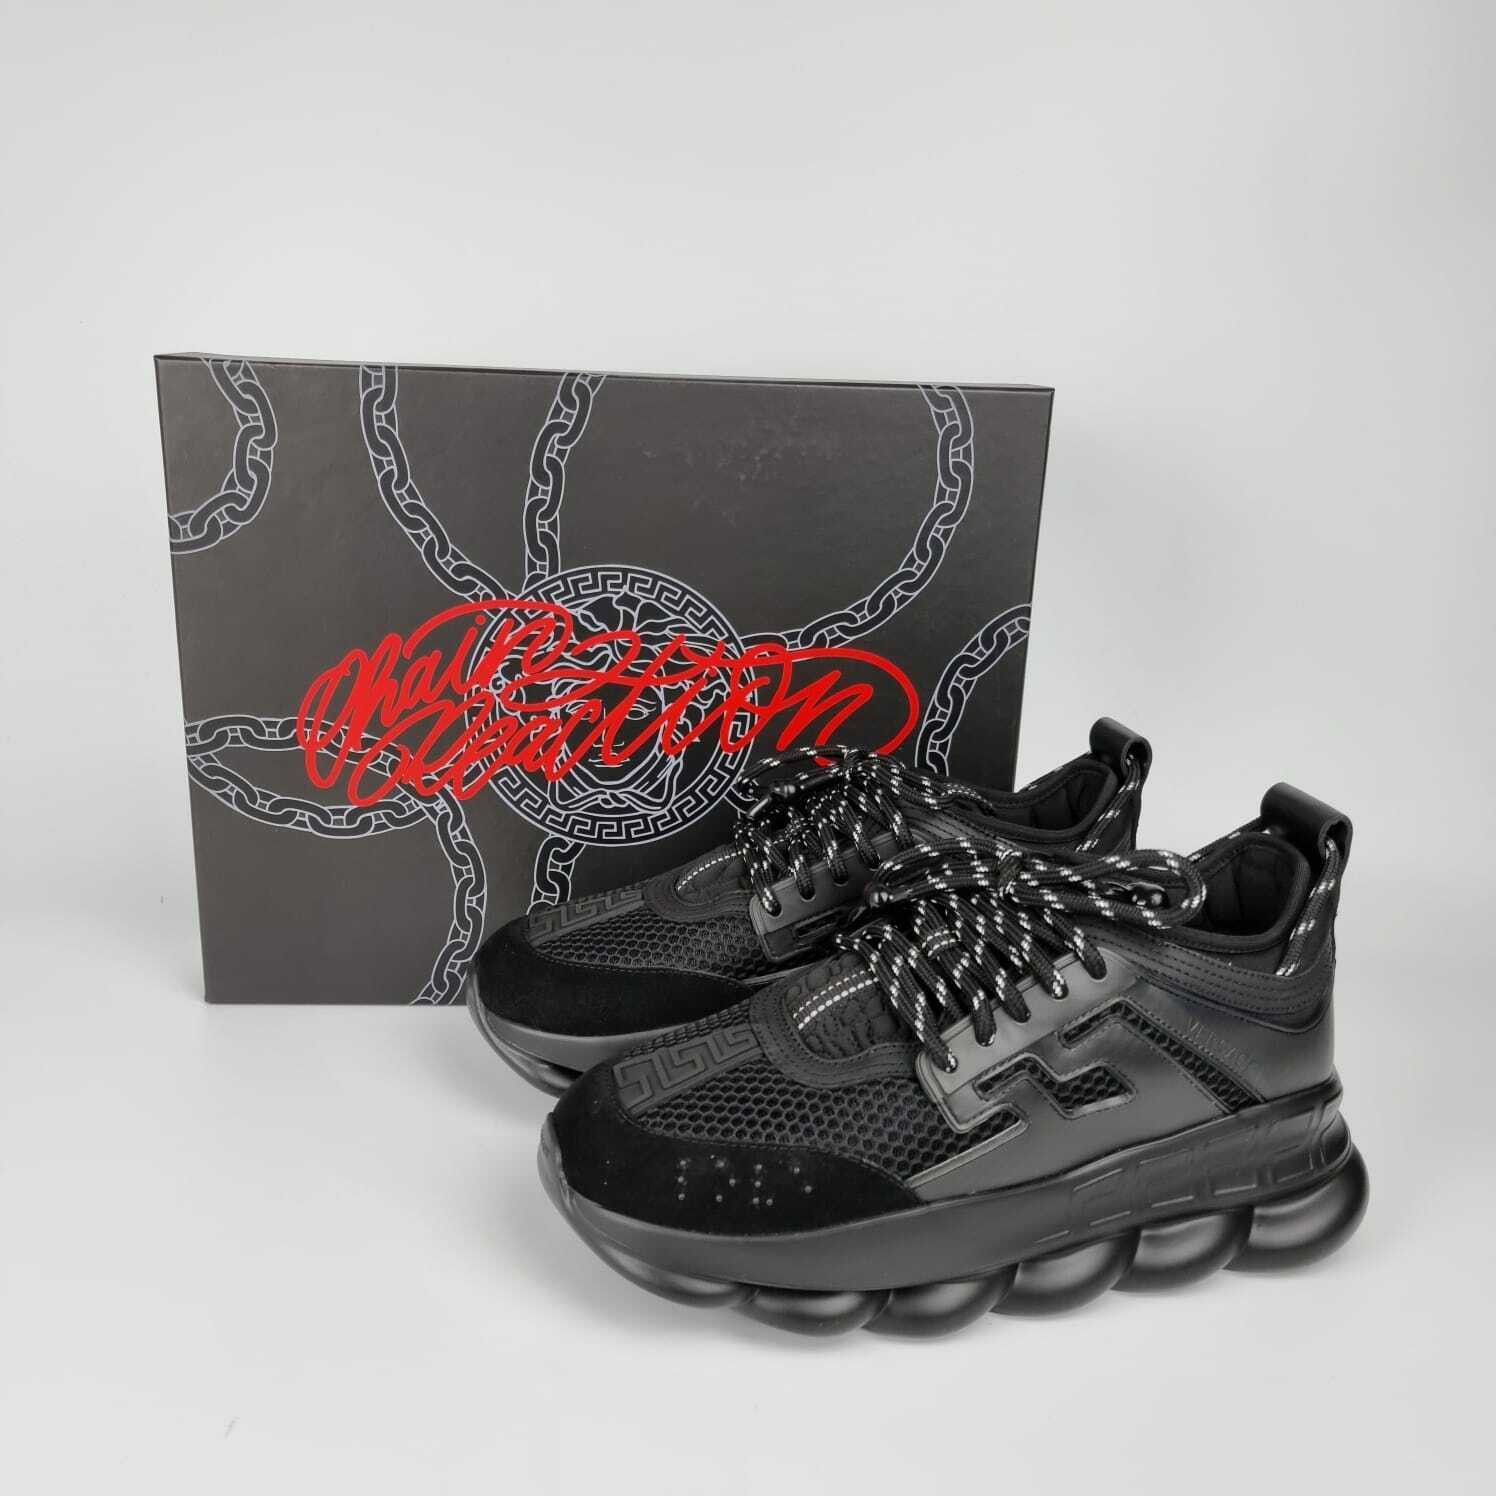 Now Available: Versace Chain Reaction Black — Sneaker Shouts